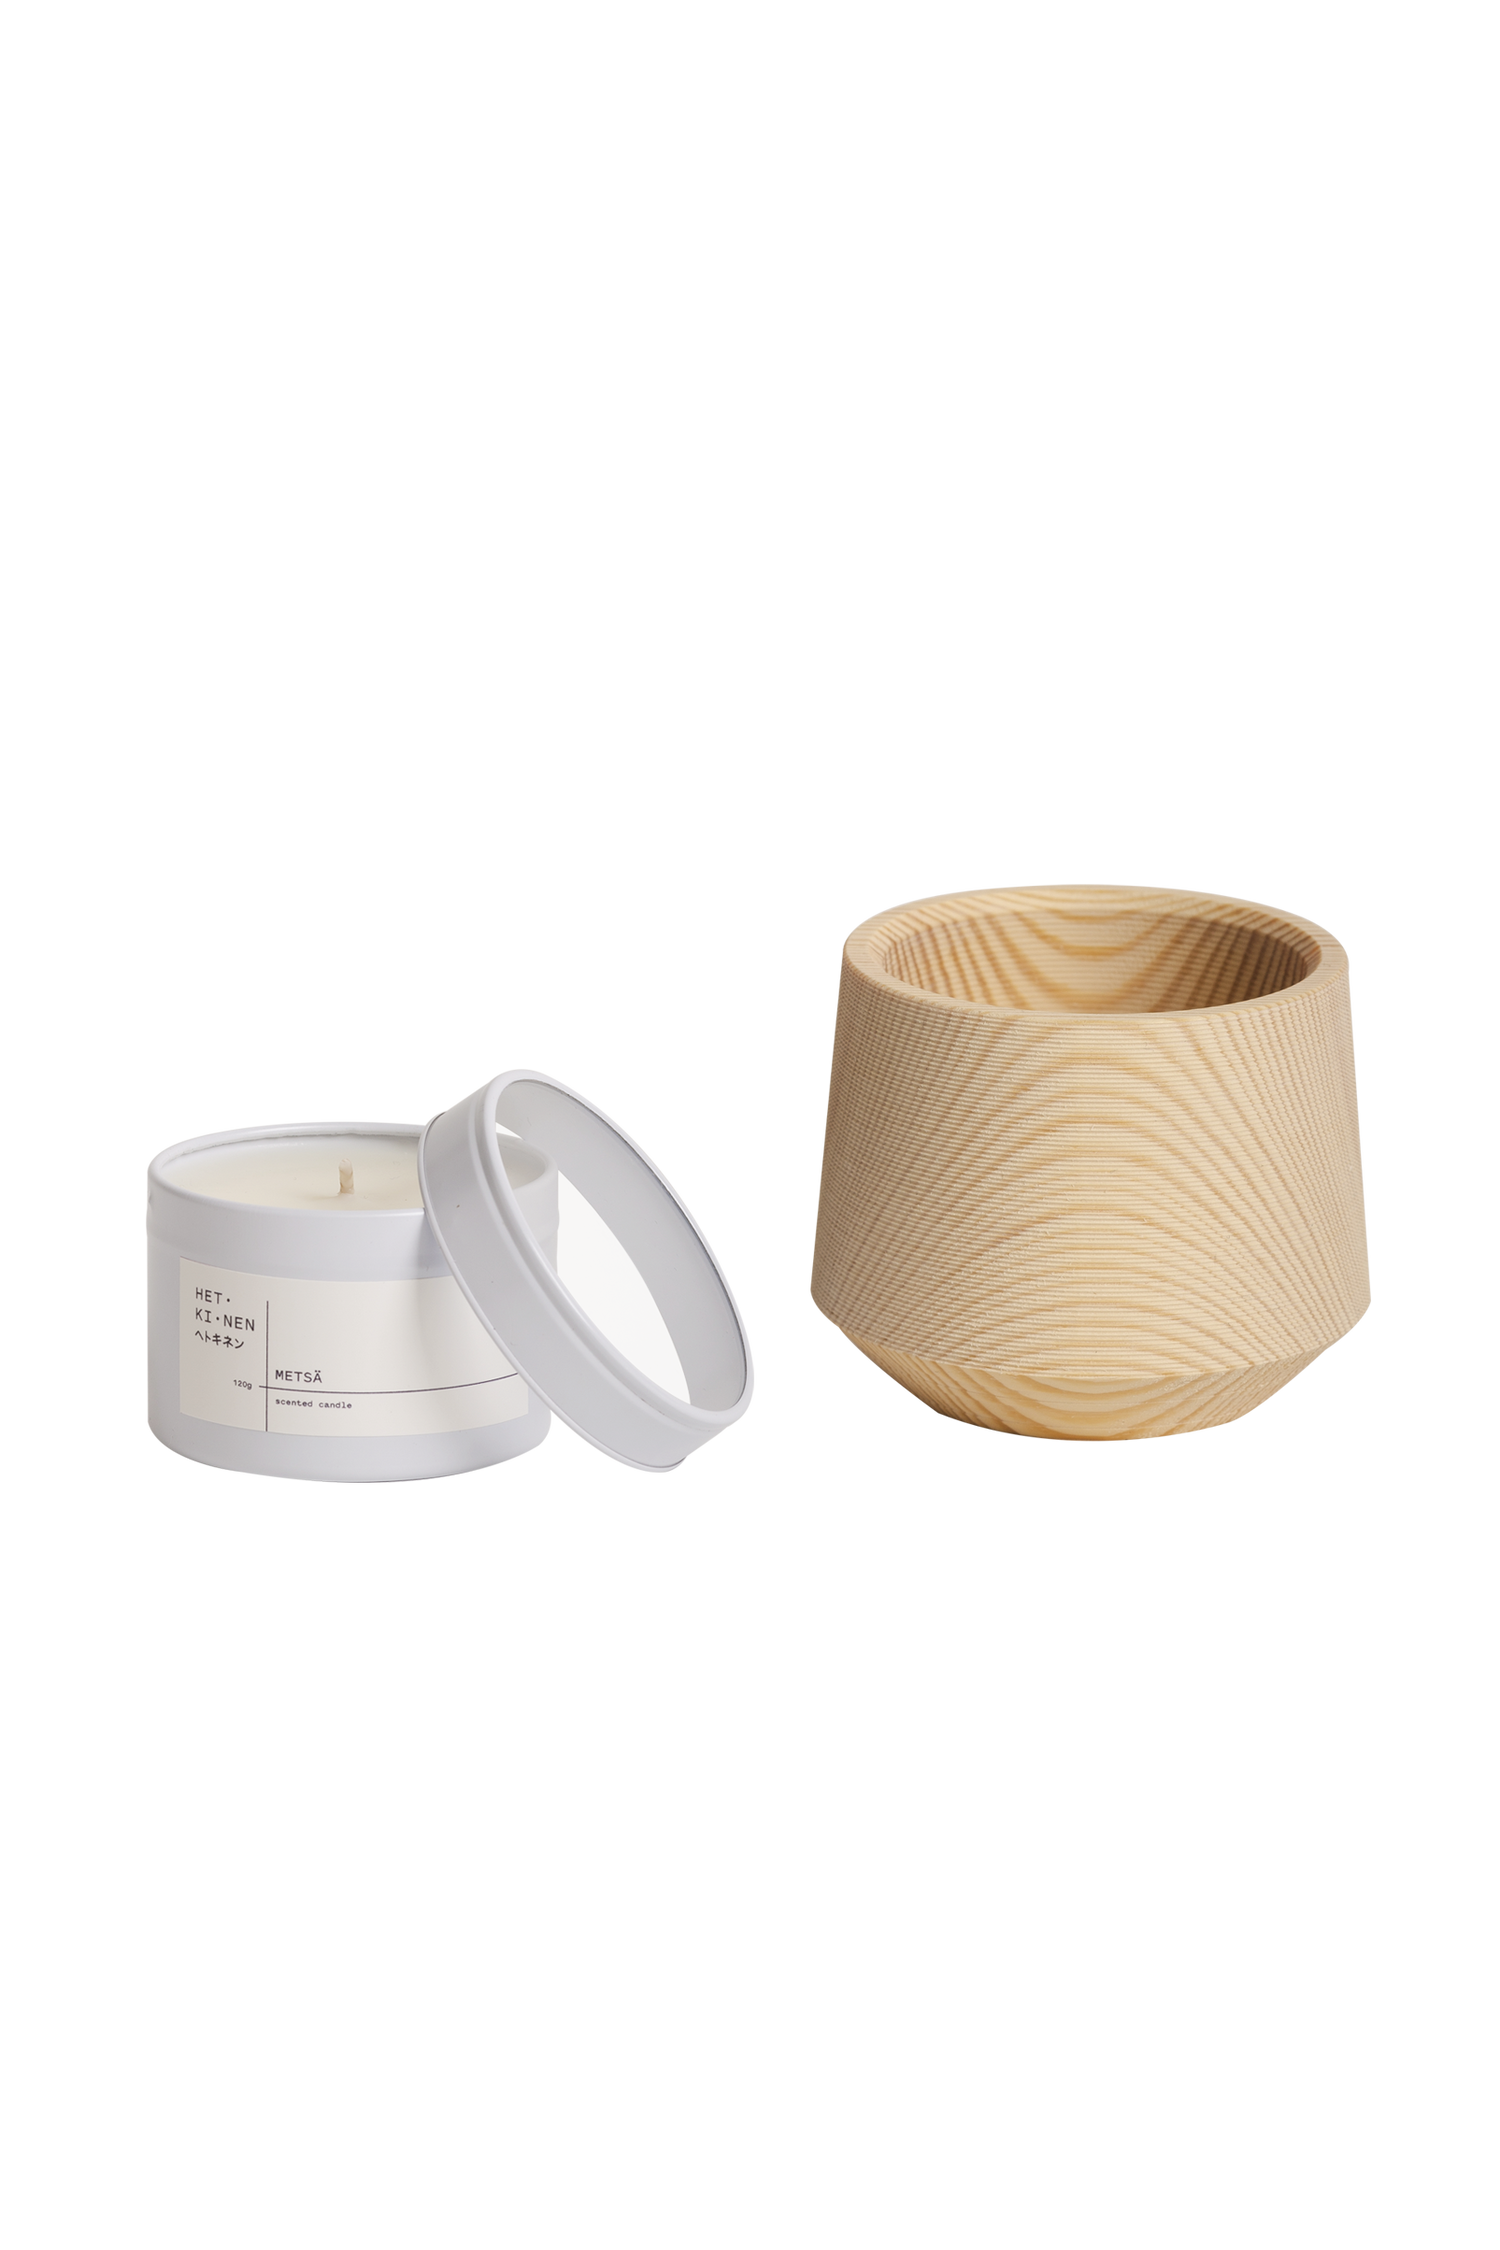 scented candle metsä refill 3 pack